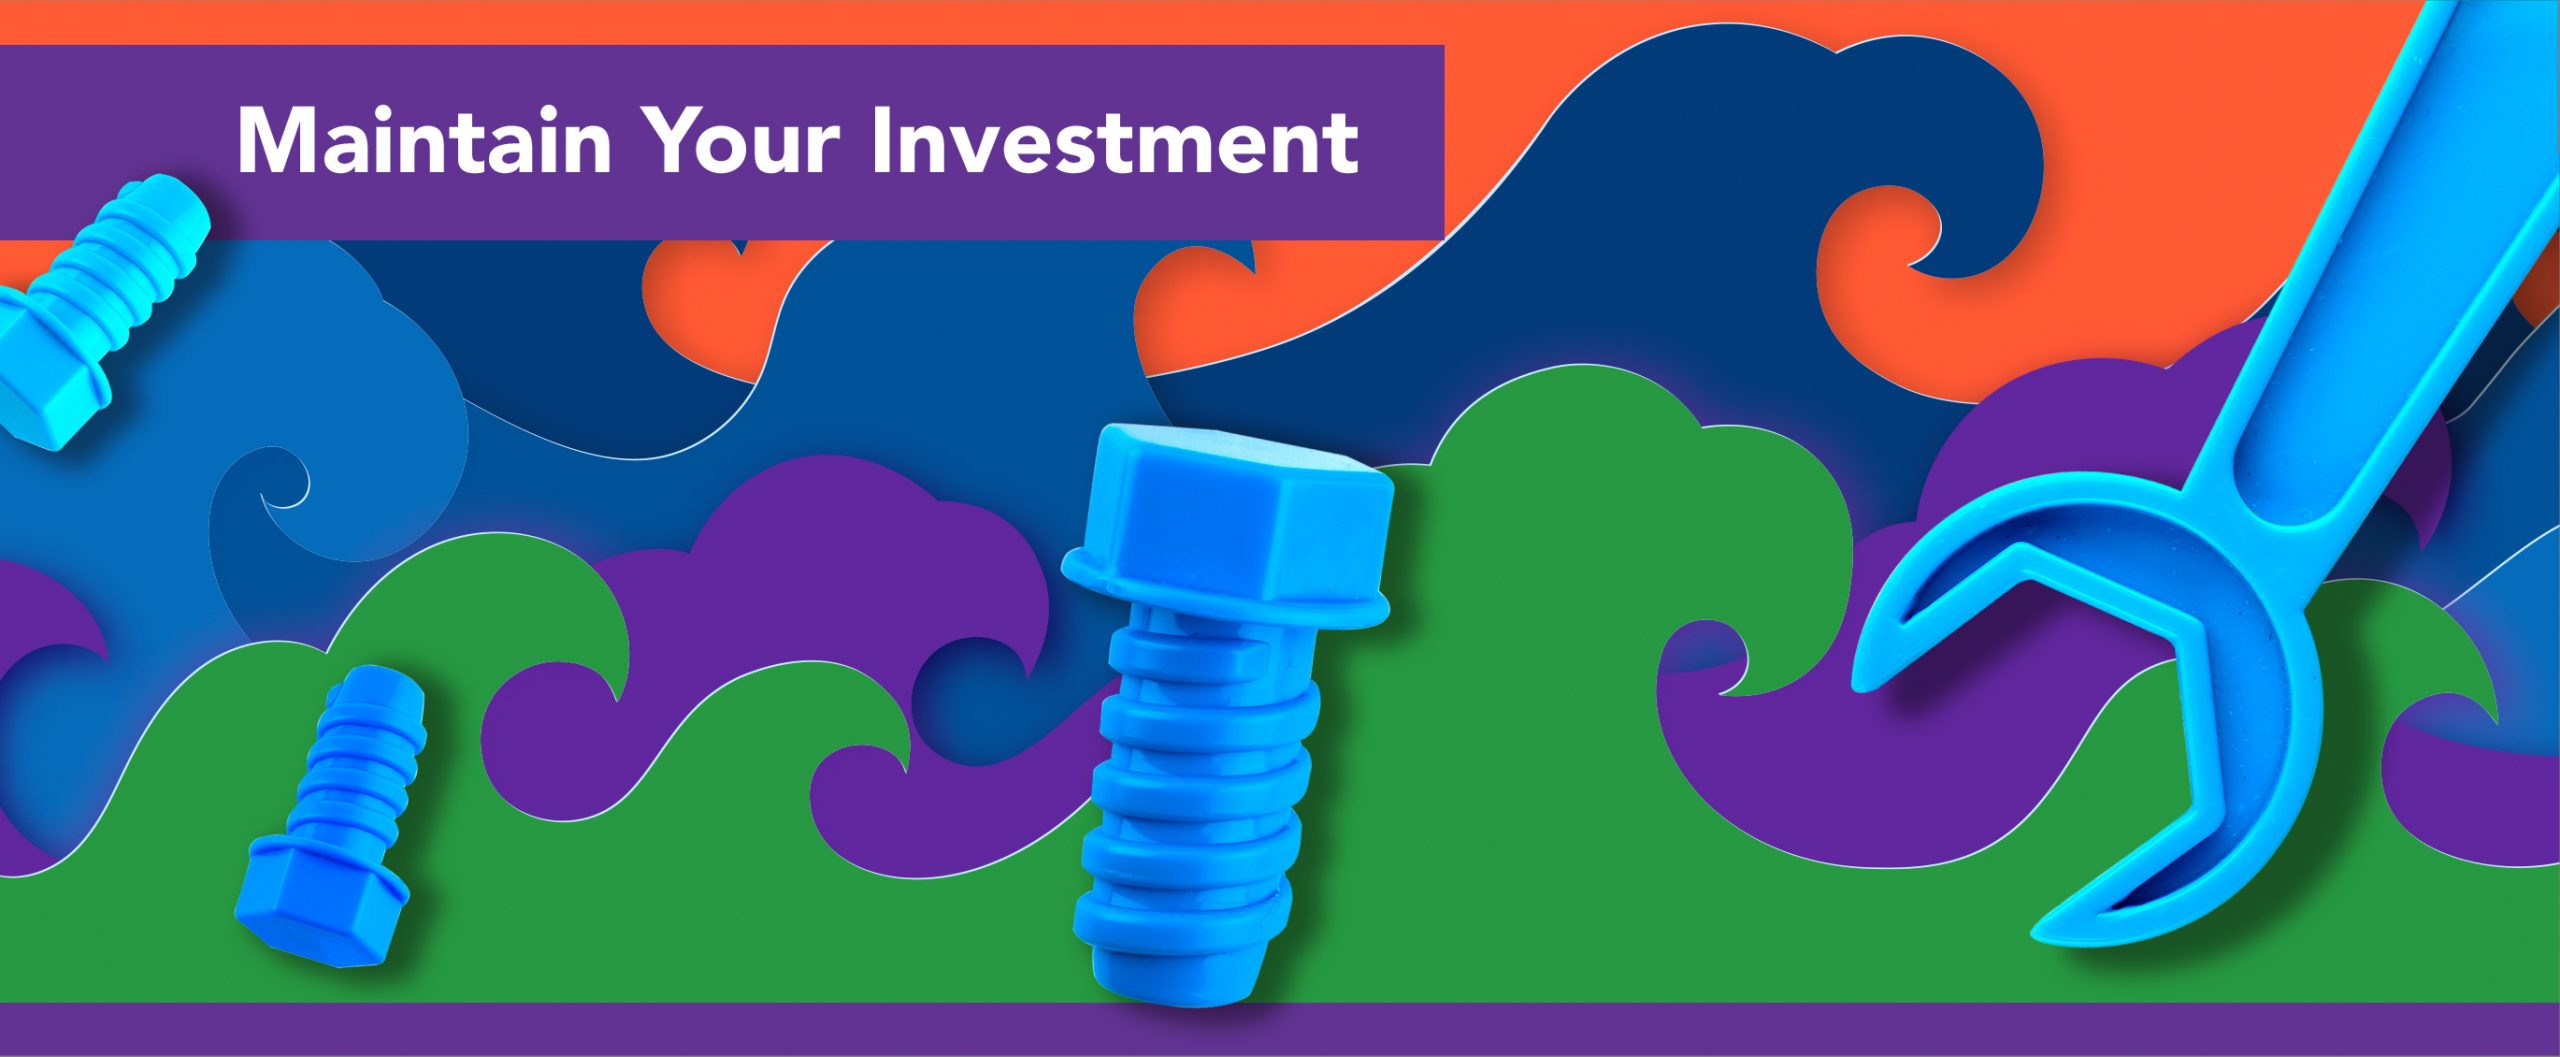 graphic with multiple colors and screws with text saying "Maintain your investment"